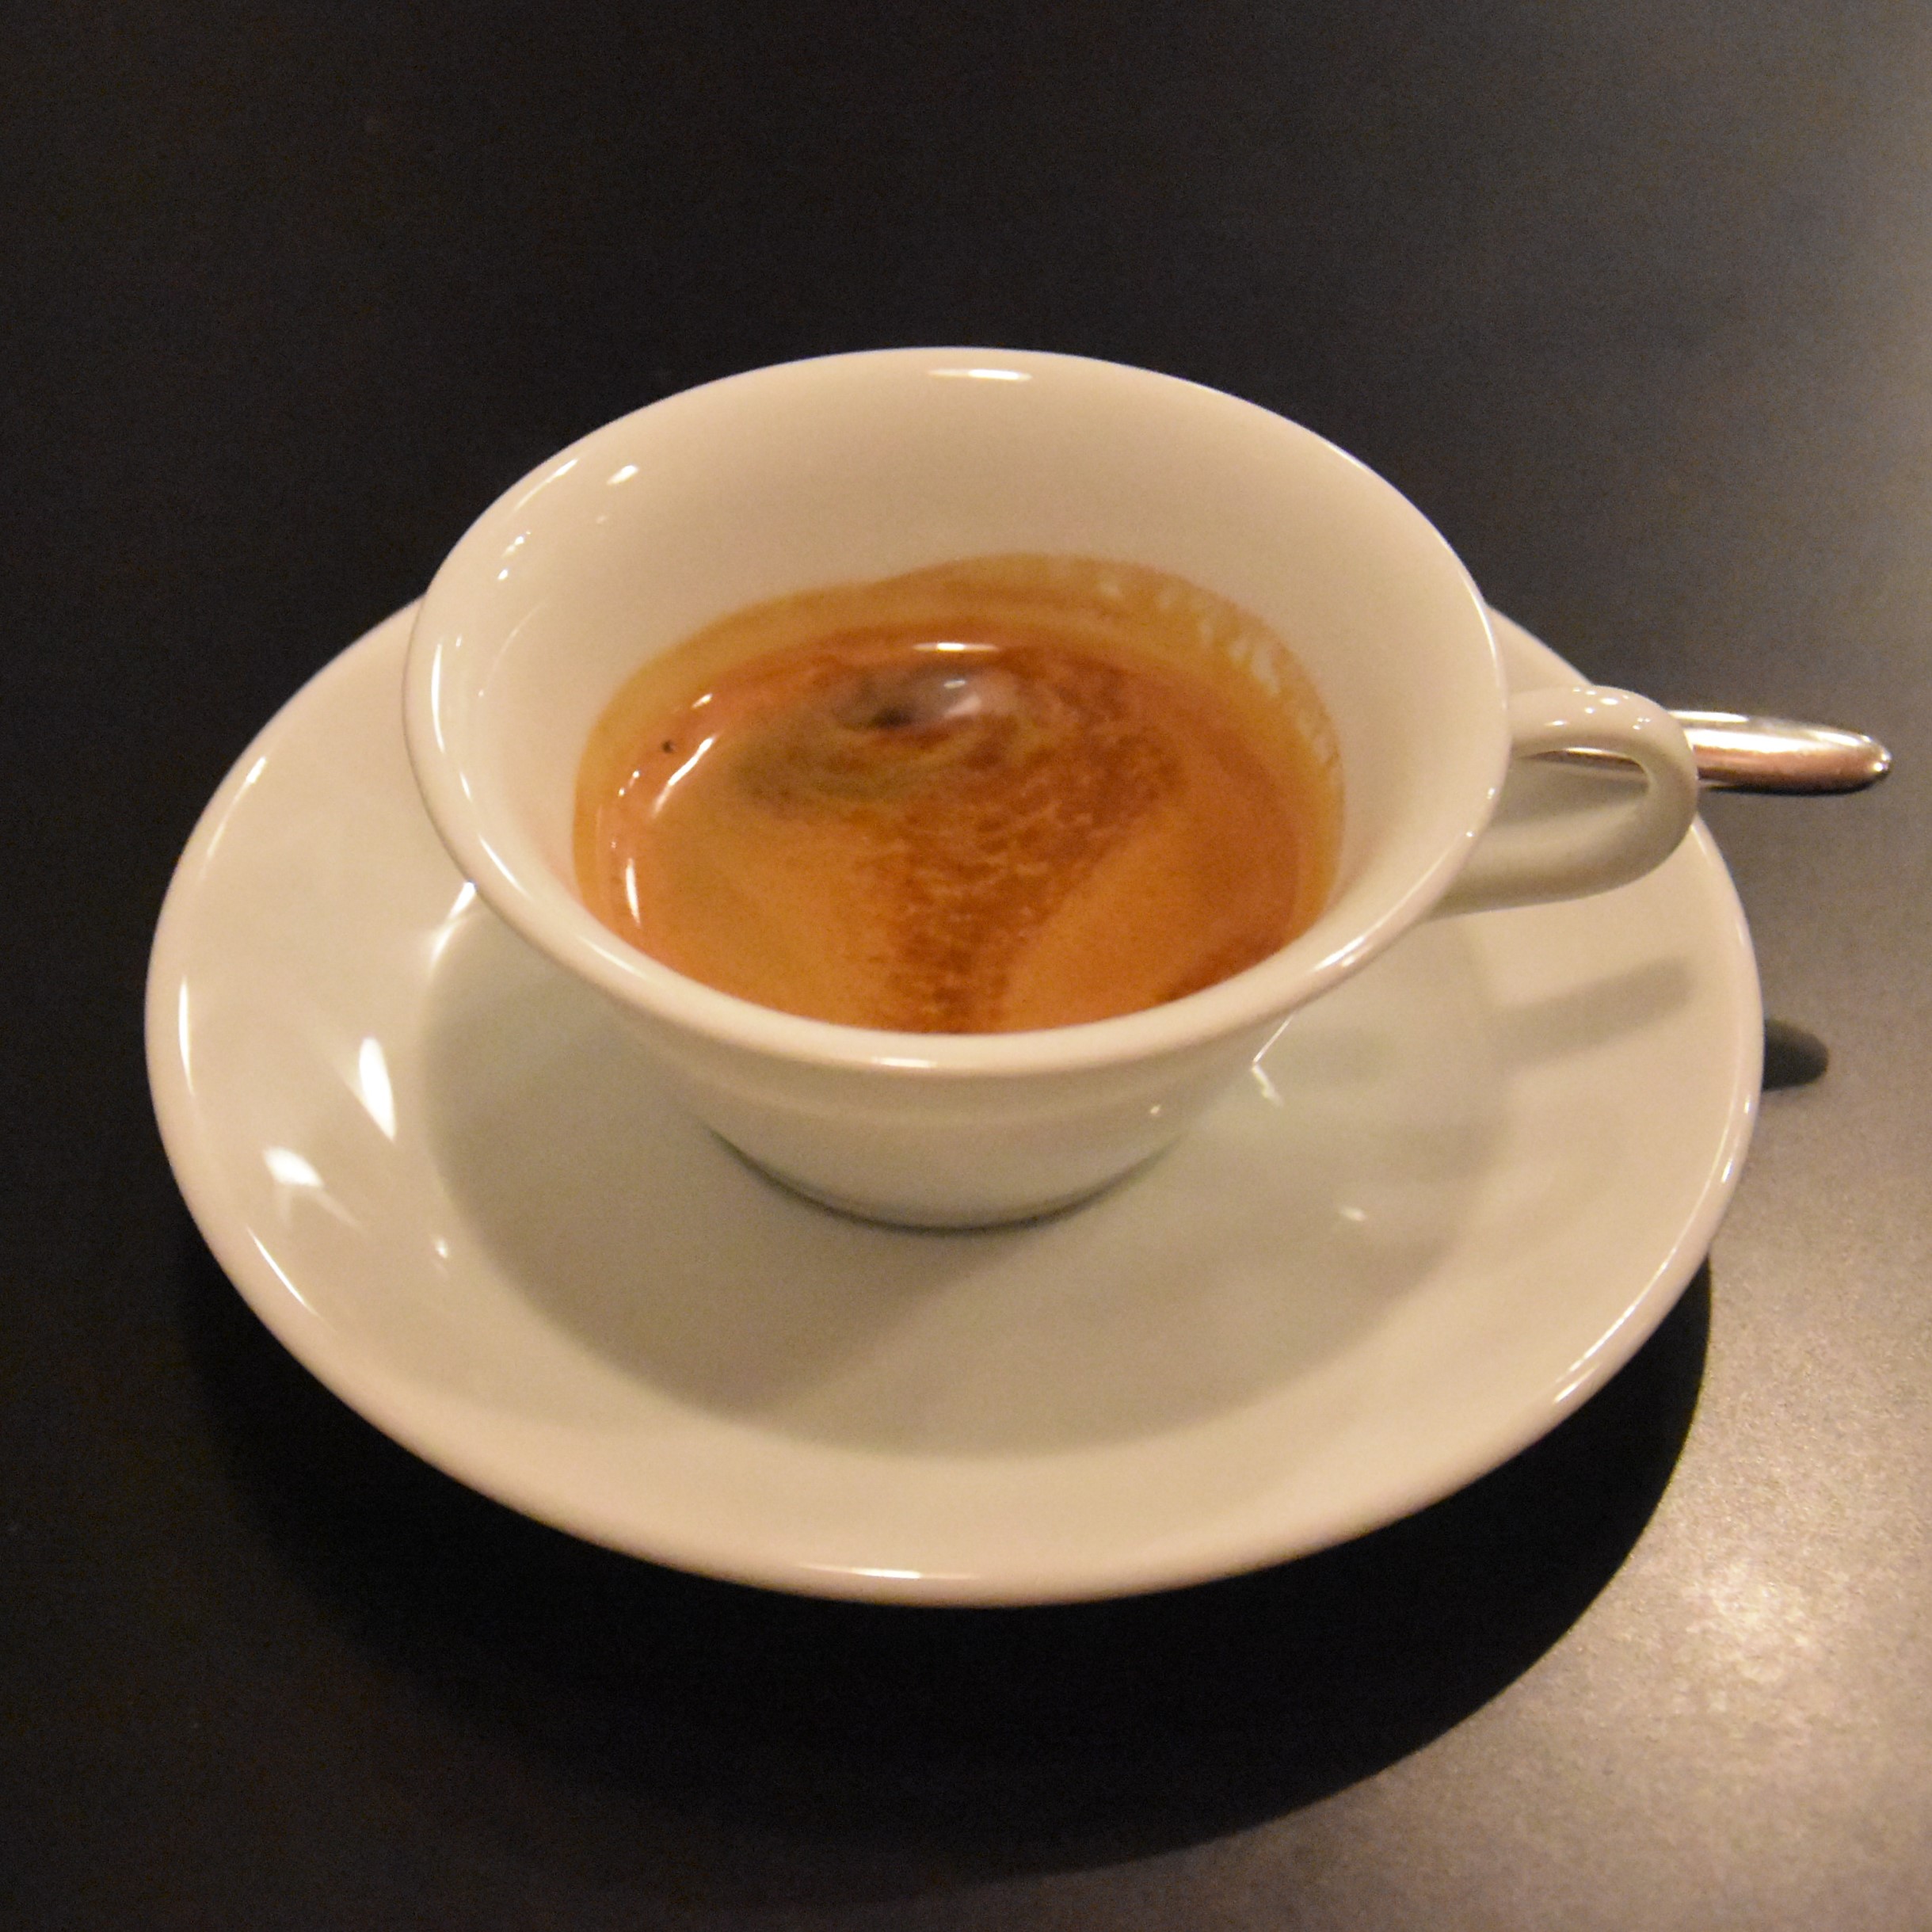 A single-origin espresso served in a wide-brimmed demitasse cup at Maruyama Single Origin in Aoyama, Tokyo, part of an espresso set where the same coffee is served in two different cups.